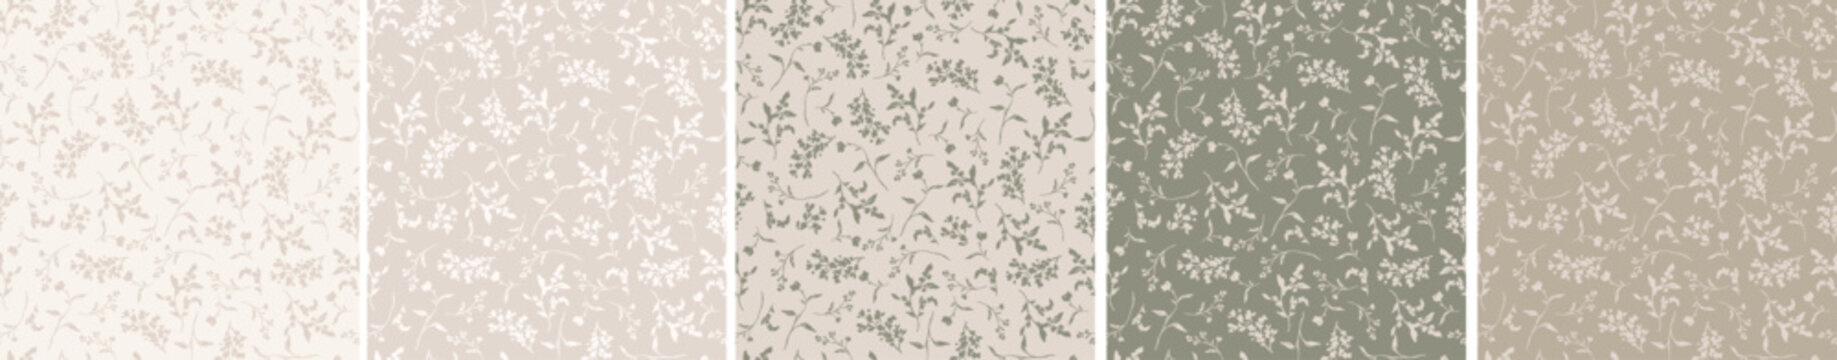 Set of earthy tones elegant neutral natural seamless pattern, repeating background with leaves and laurels for wallpaper, fabric, interior design, floral print for scrapbook paper.